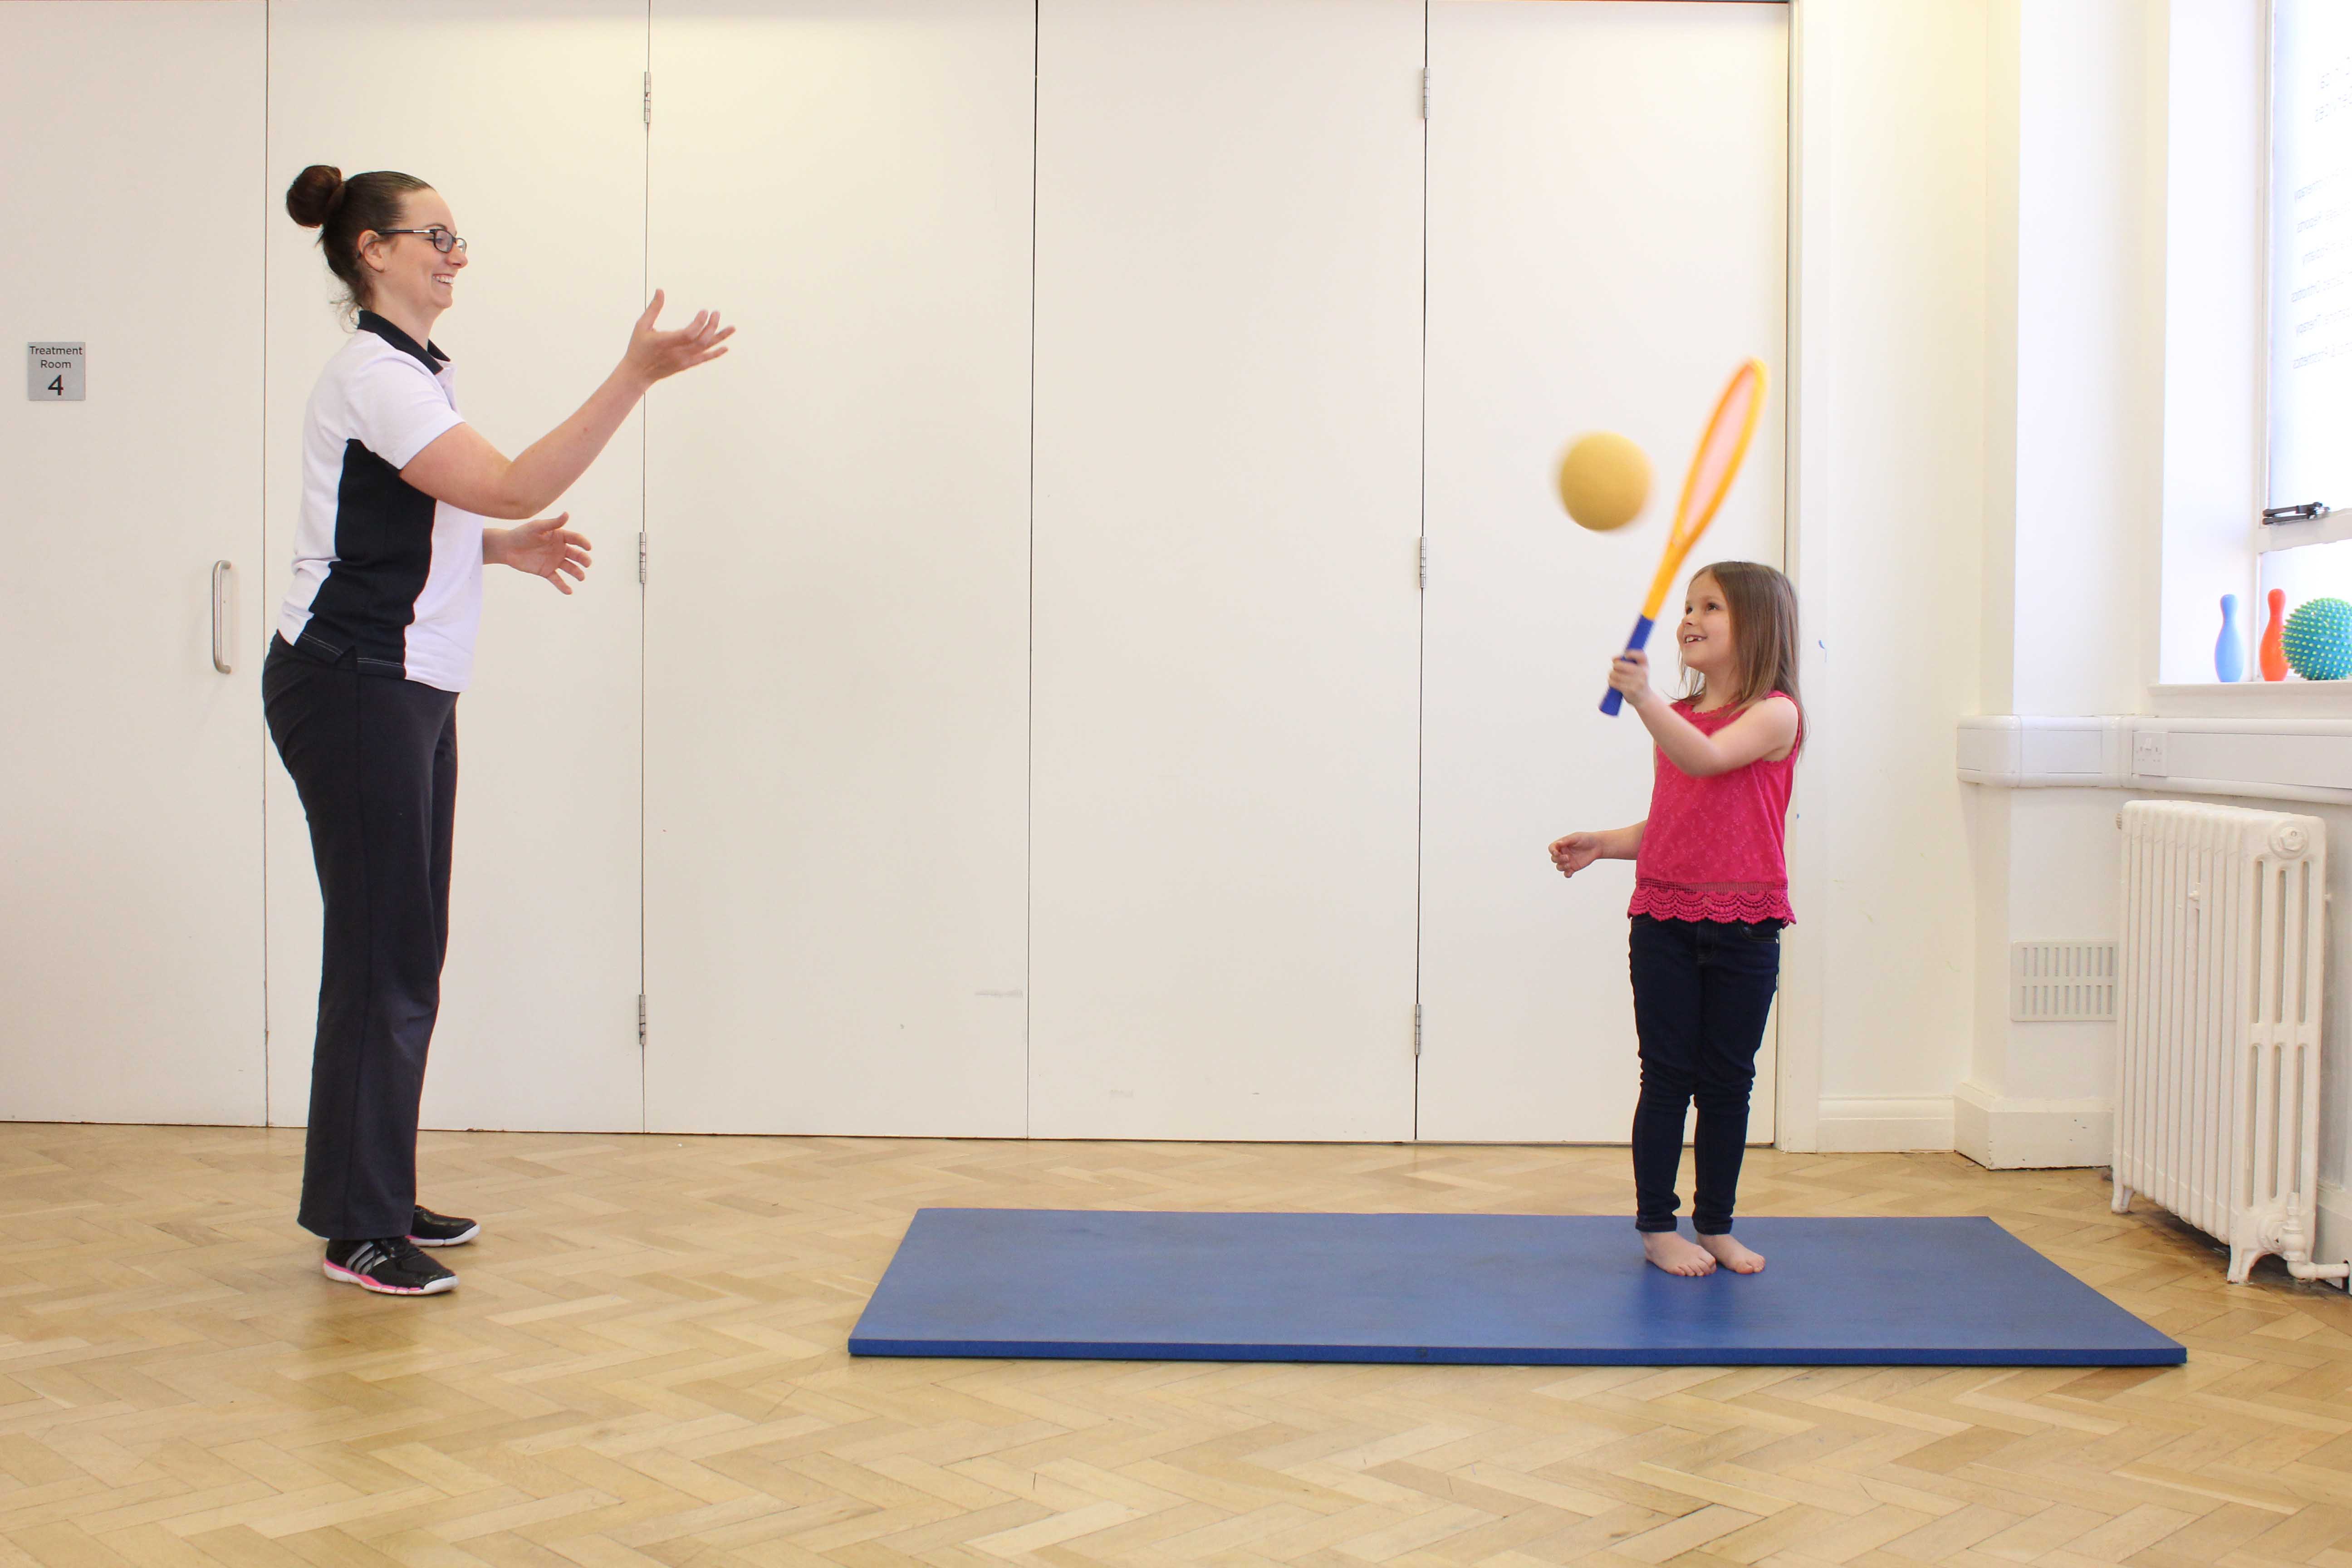 Improving patient awareness of body position through activity 